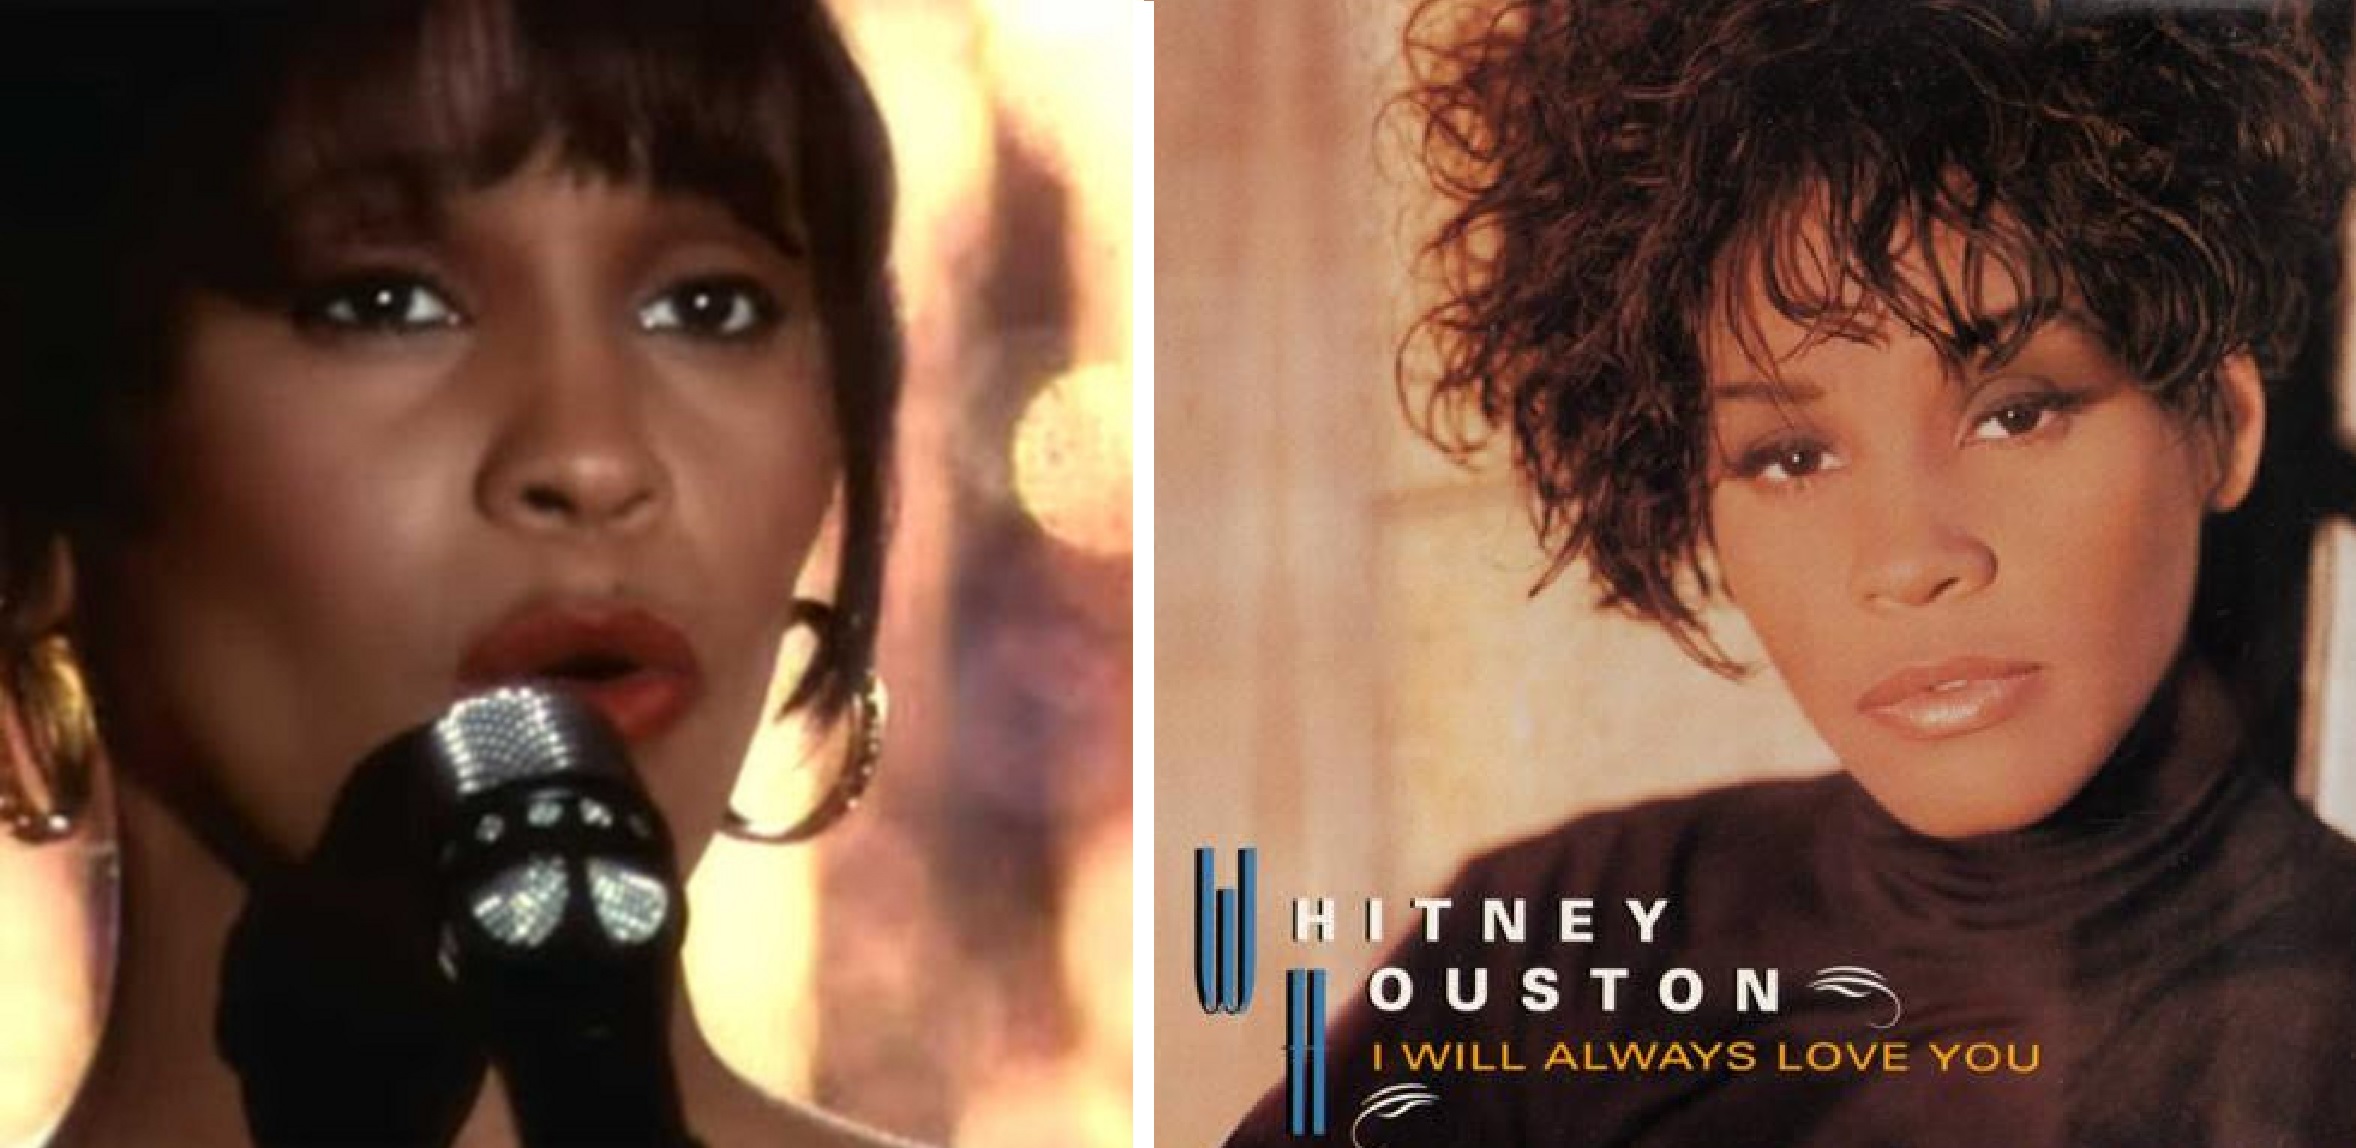 Whitney Houston’s ‘I Will Always Love You’ Crosses 1 Billion Views On YouTube –  First Solo 20th Century Artist To Do So!